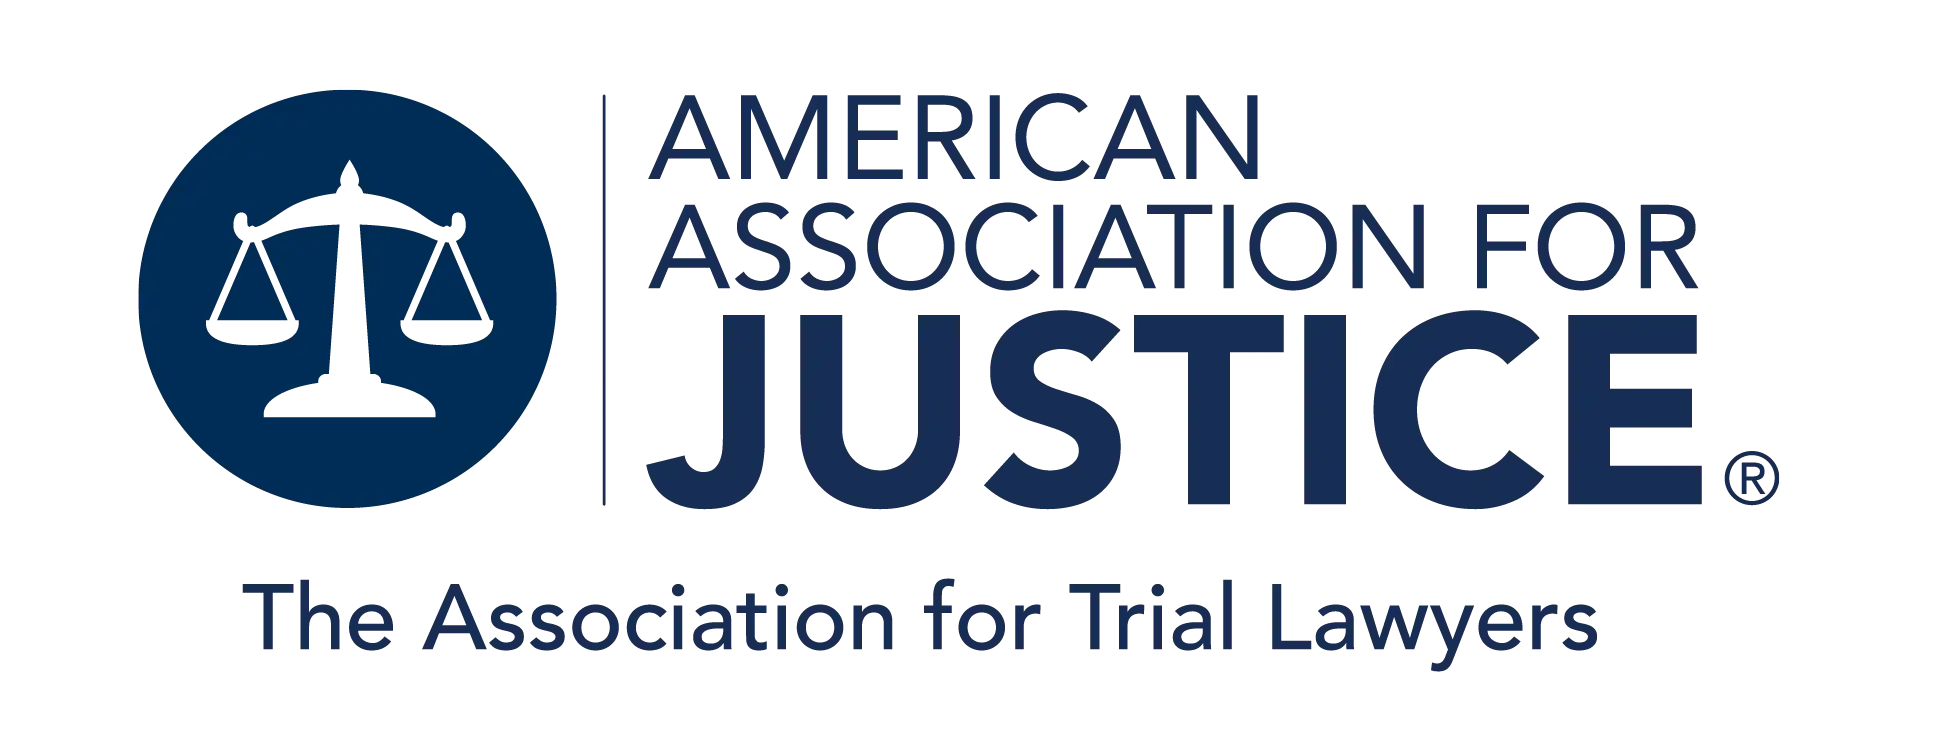 American Association for Justice Logo